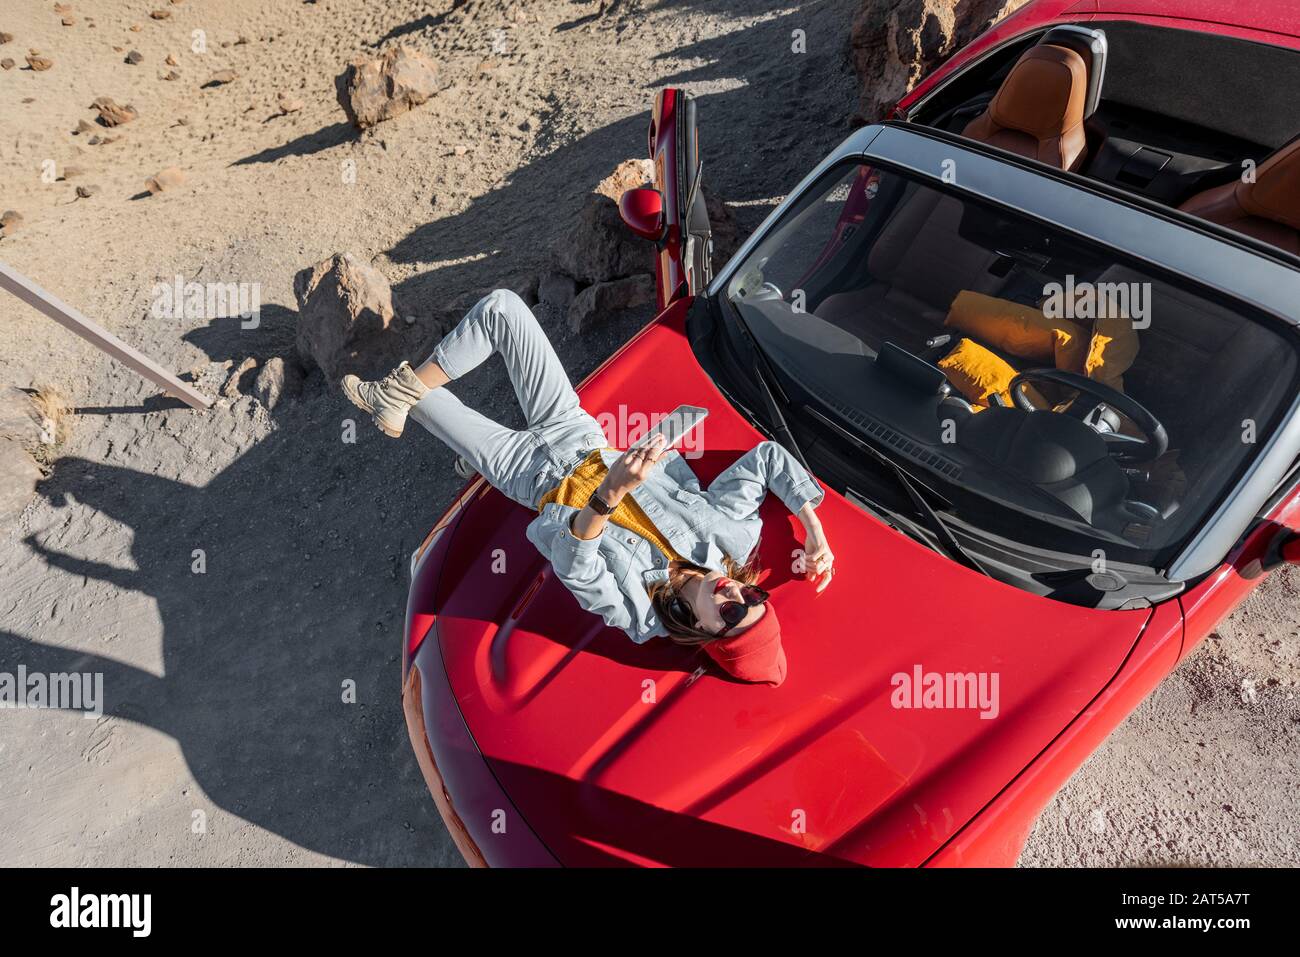 Lifestyle portrait of a young woman enjoying road trip on the desert valley, lying on the car hood and photographing on phone. View from above Stock Photo